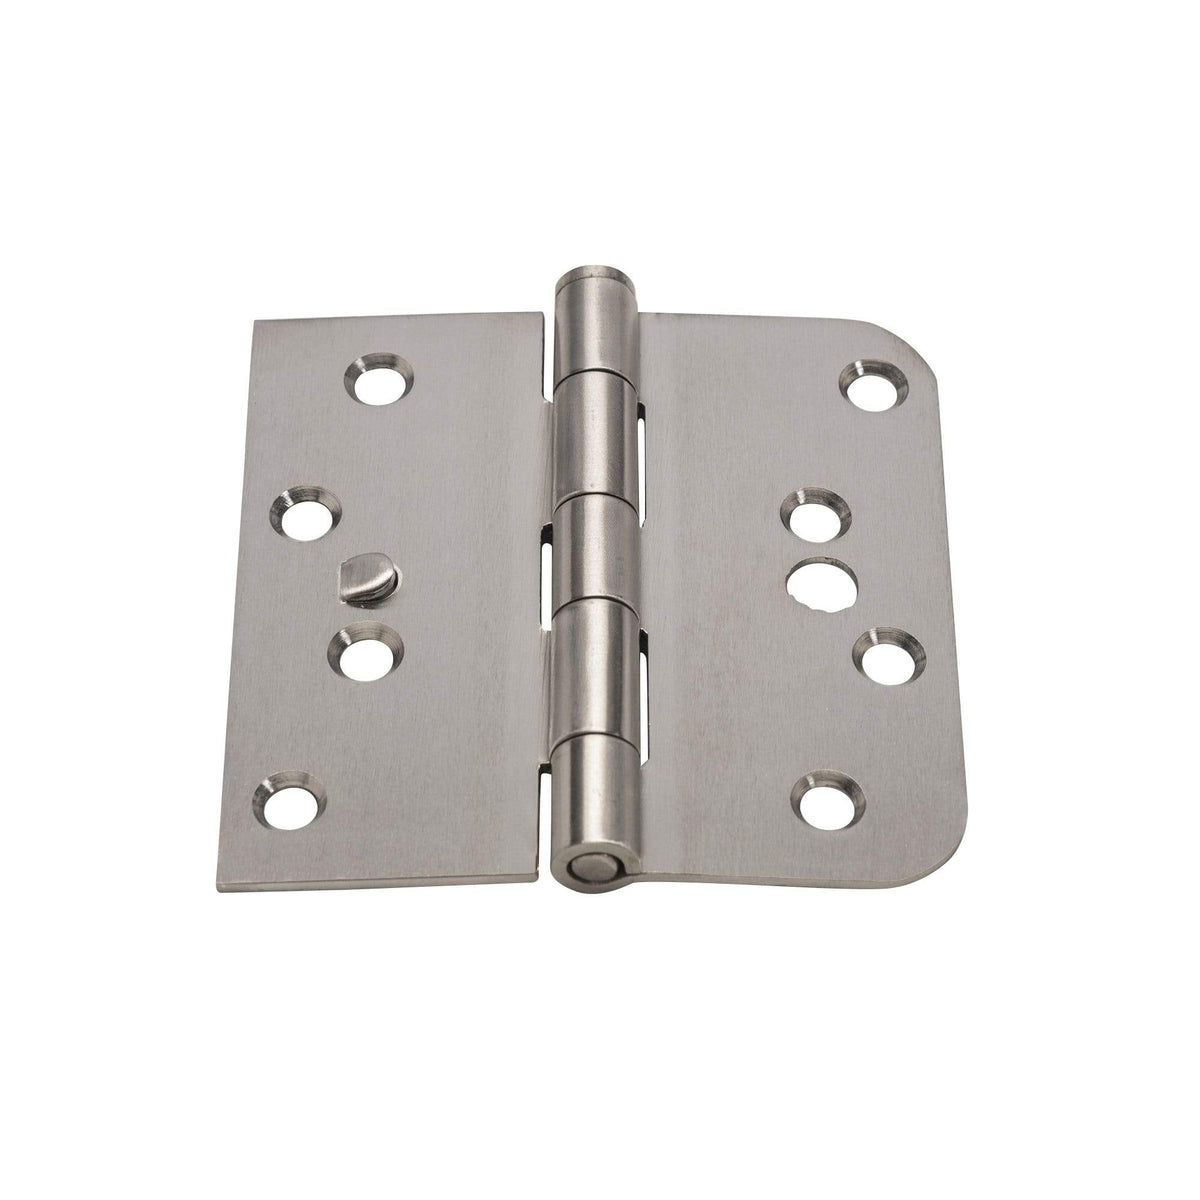 Stainless Steel Hinges With Security Tab - 4" X 4" Plain Bearing Hinge Square Corner With 5/8" Radius Corner - 2 Pack - Clearance